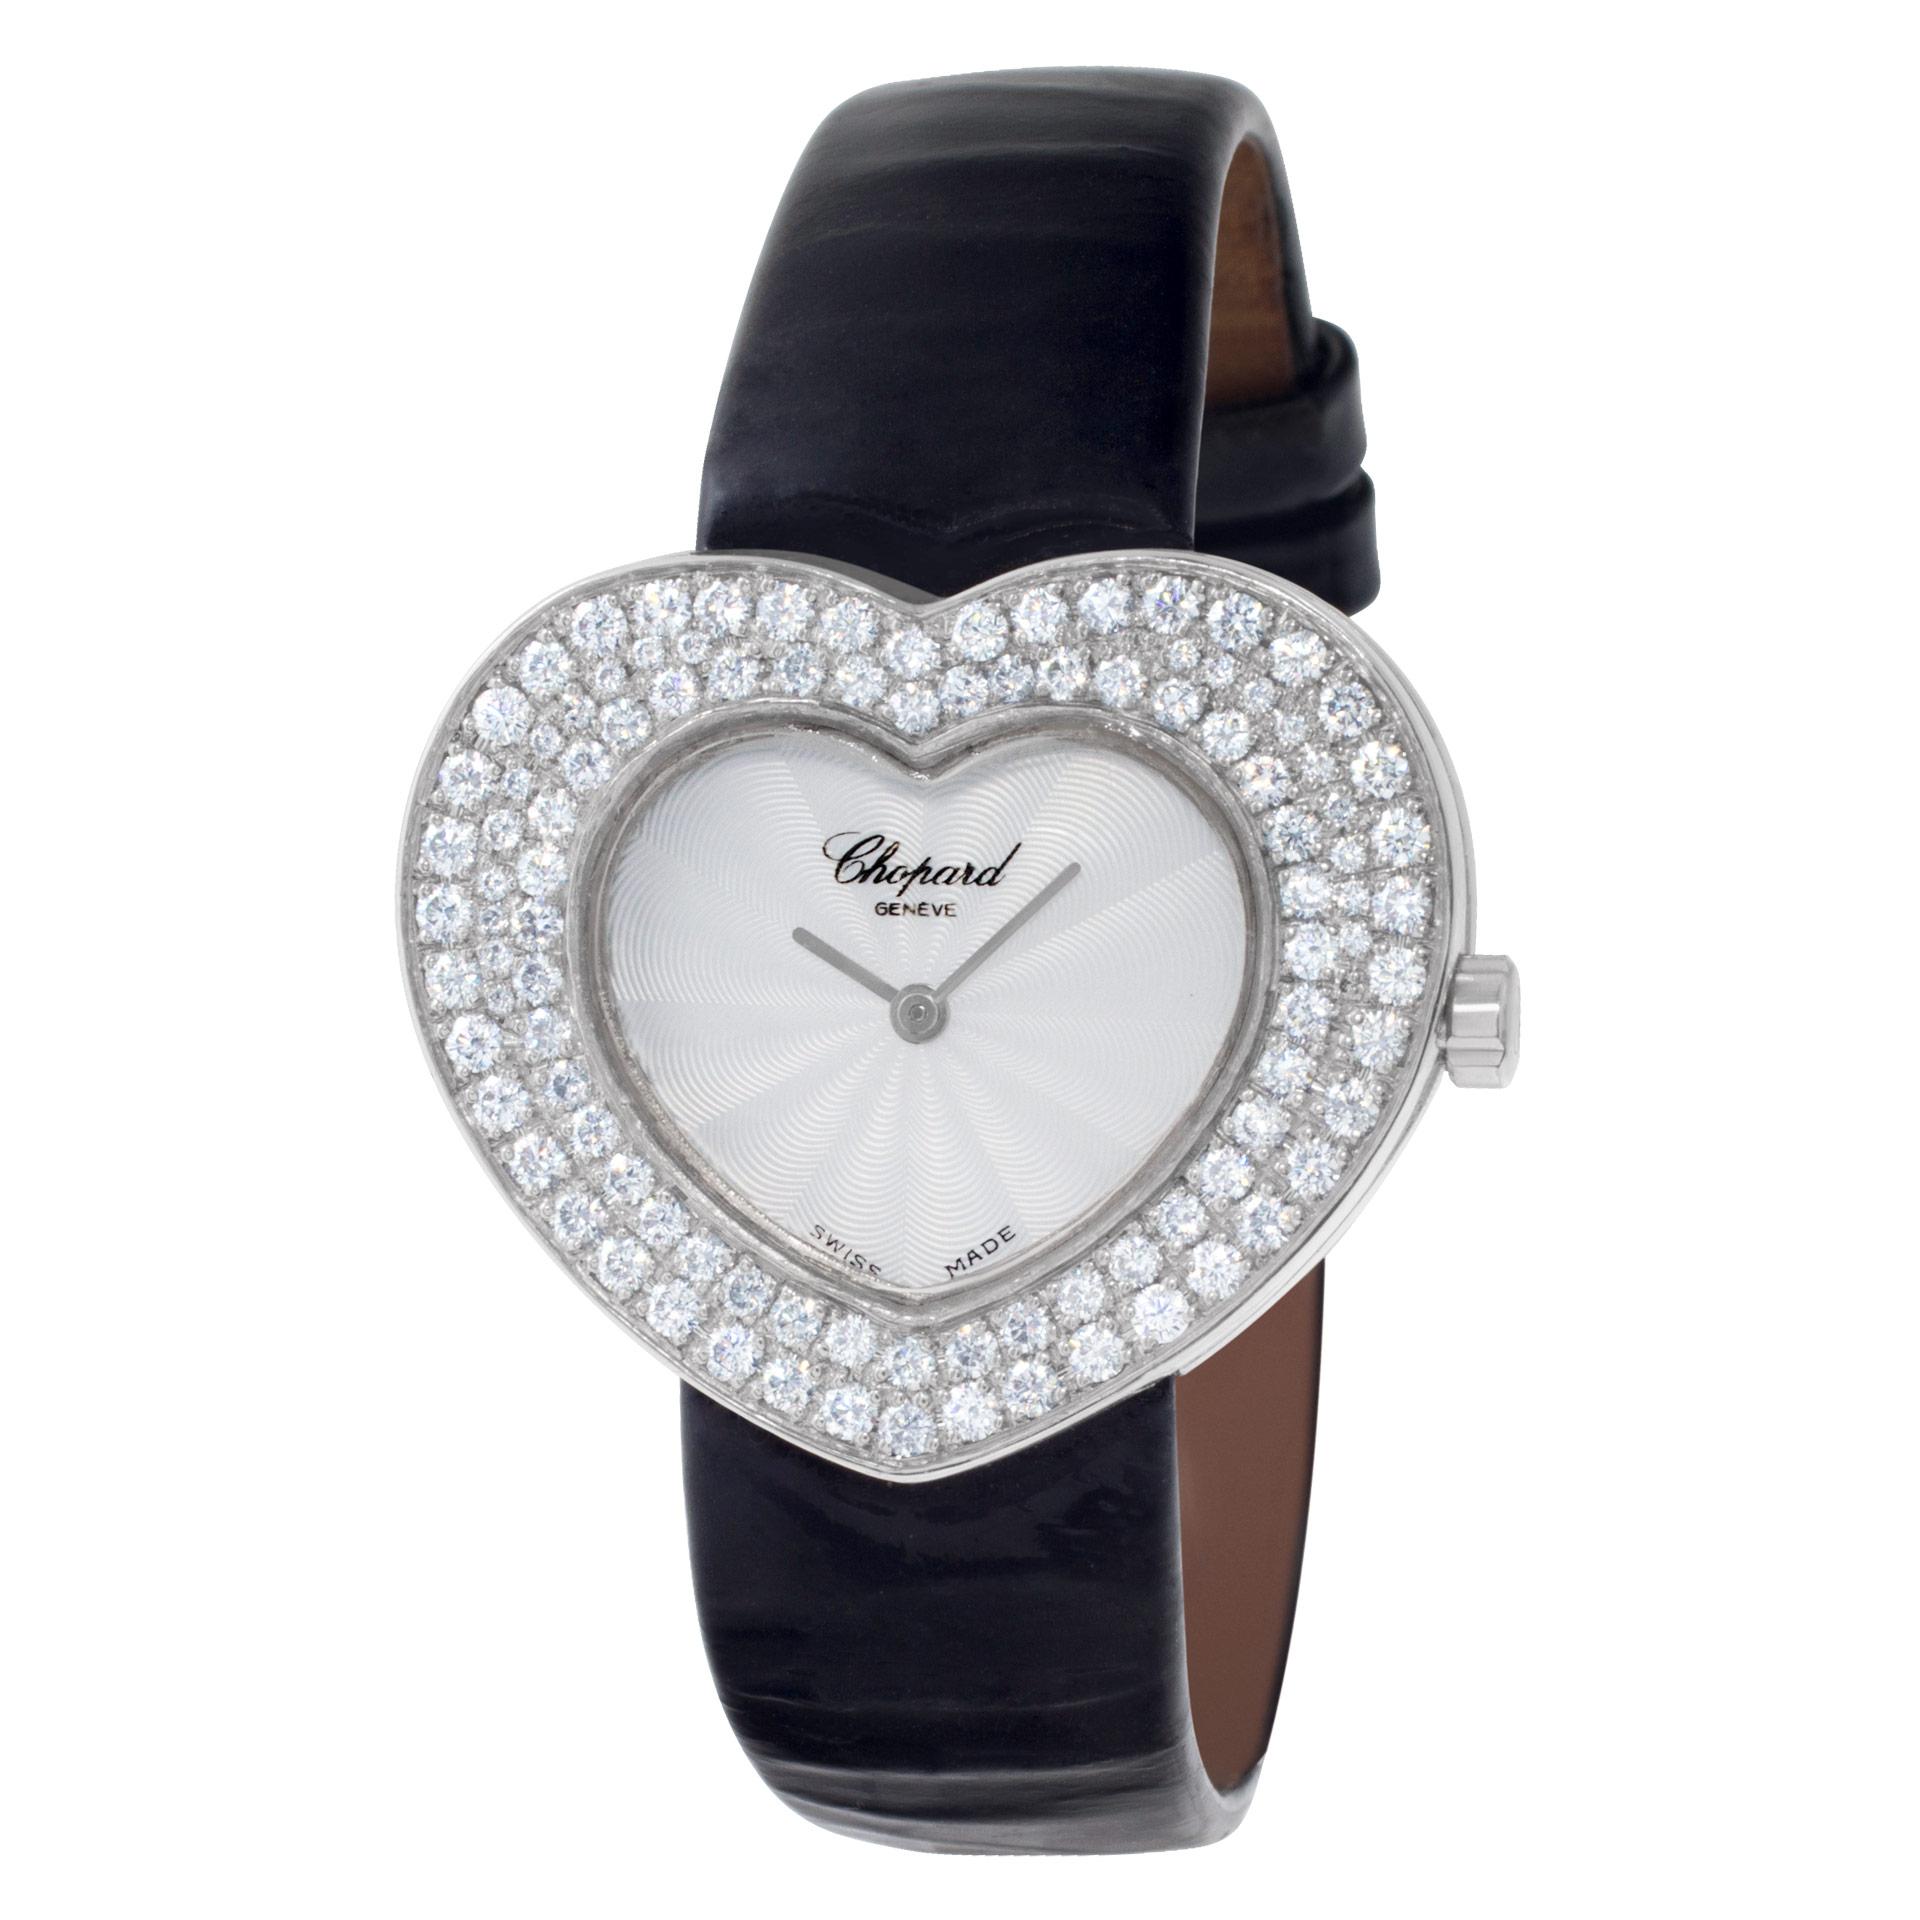 Chopard diamond heart in 18k white gold with custom diamond bezel  with silver guilloche dial on leather strap. Quartz. Ref 5631. Fine Pre-owned Chopard Watch.  Certified preowned Classic Chopard Heart 5631 watch is made out of white gold on a Black